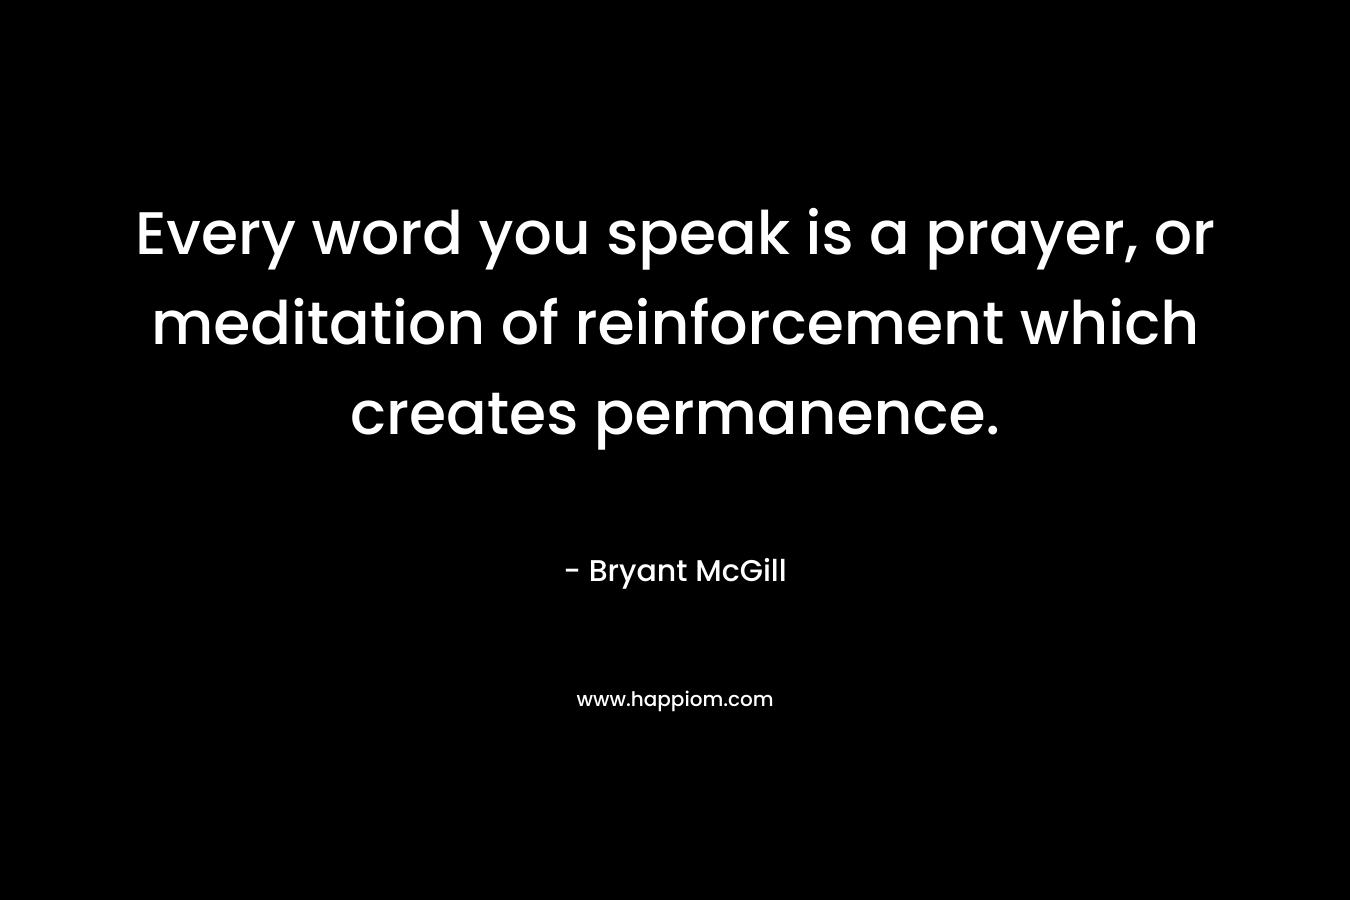 Every word you speak is a prayer, or meditation of reinforcement which creates permanence. – Bryant McGill